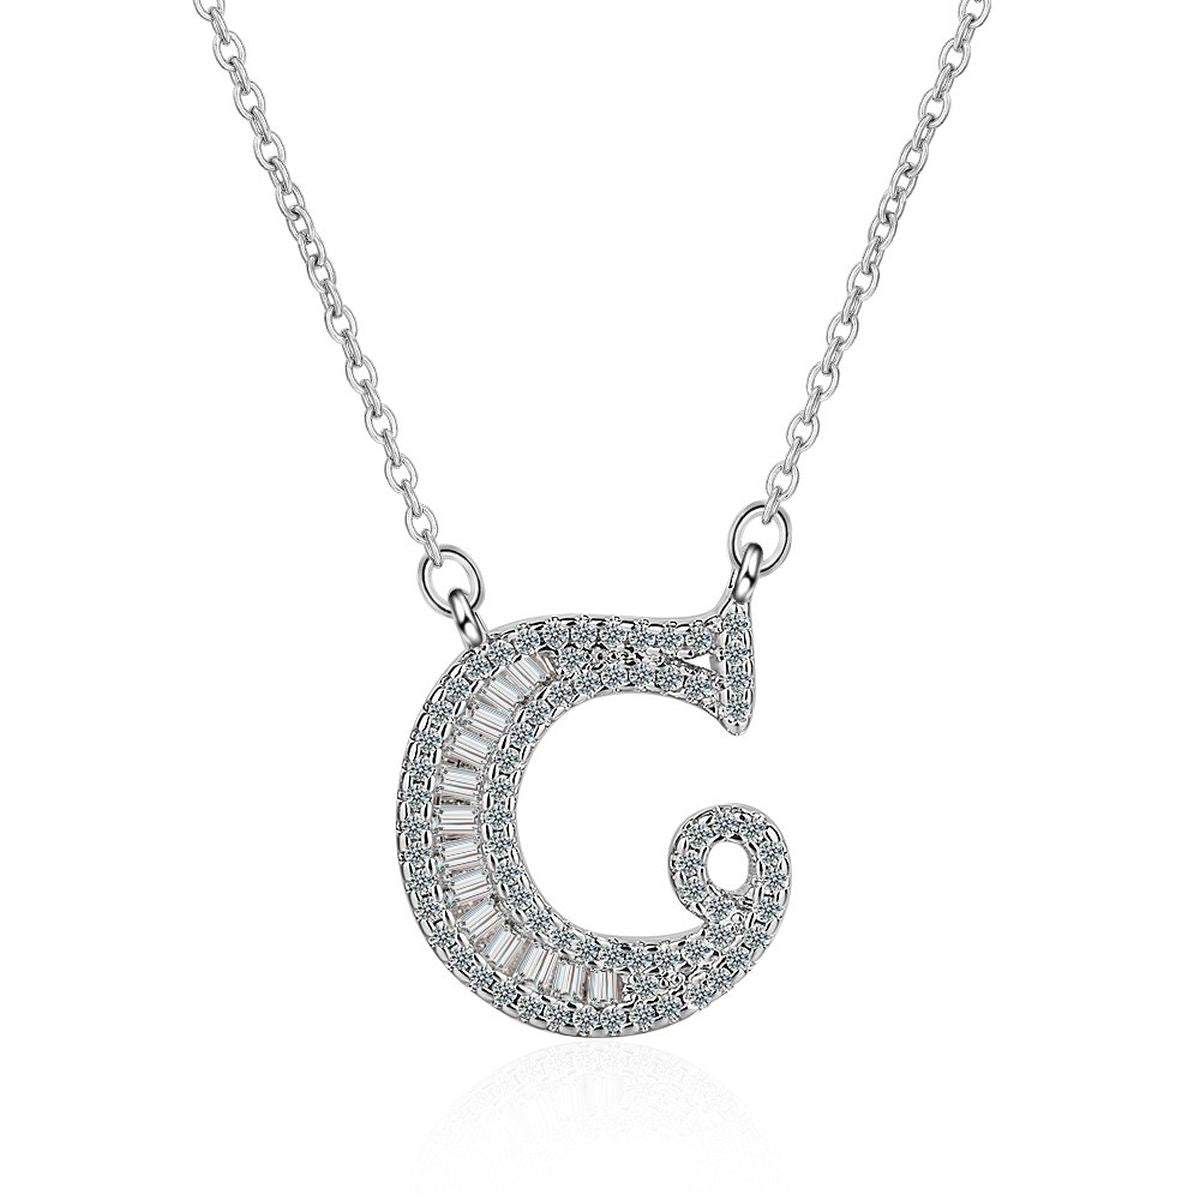 Tiny Initial Letter C Necklace - Sterling Silver | Silver necklace outfit,  Silver earrings online, Silver charm jewelry